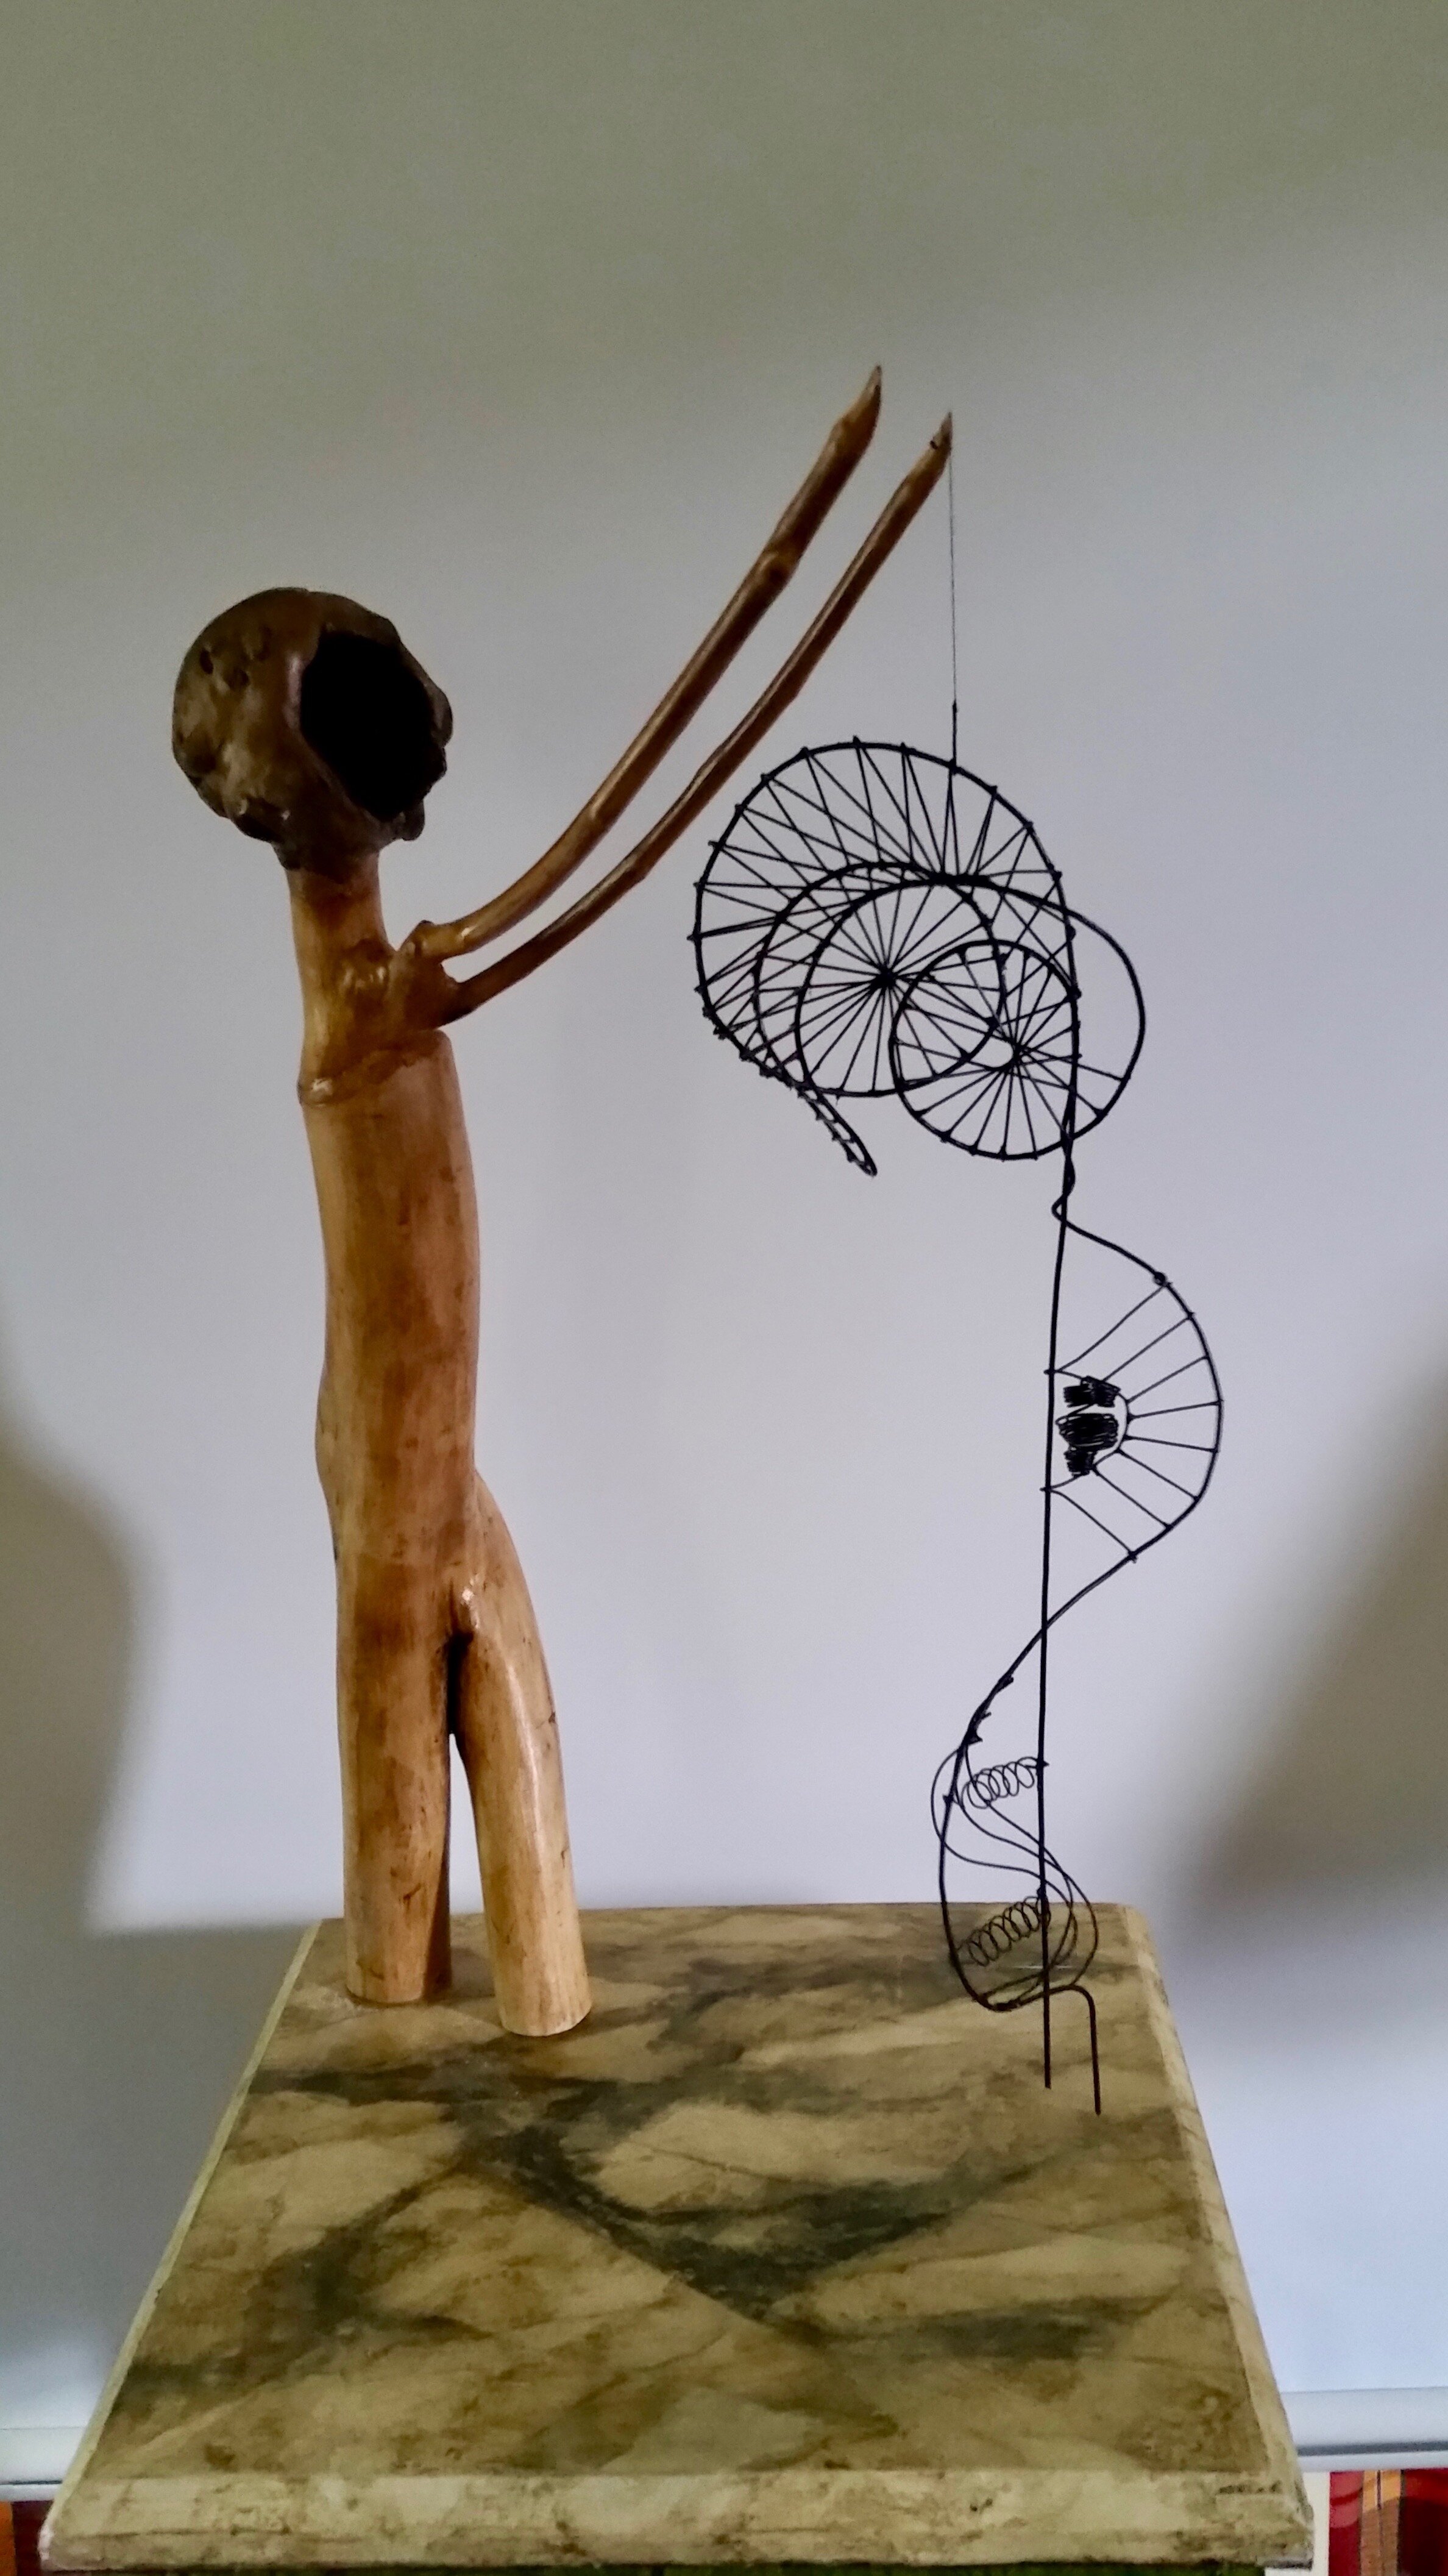 Roupas_Alter Egos_harvested wood and wire_2019_20_hx12_w.jpg